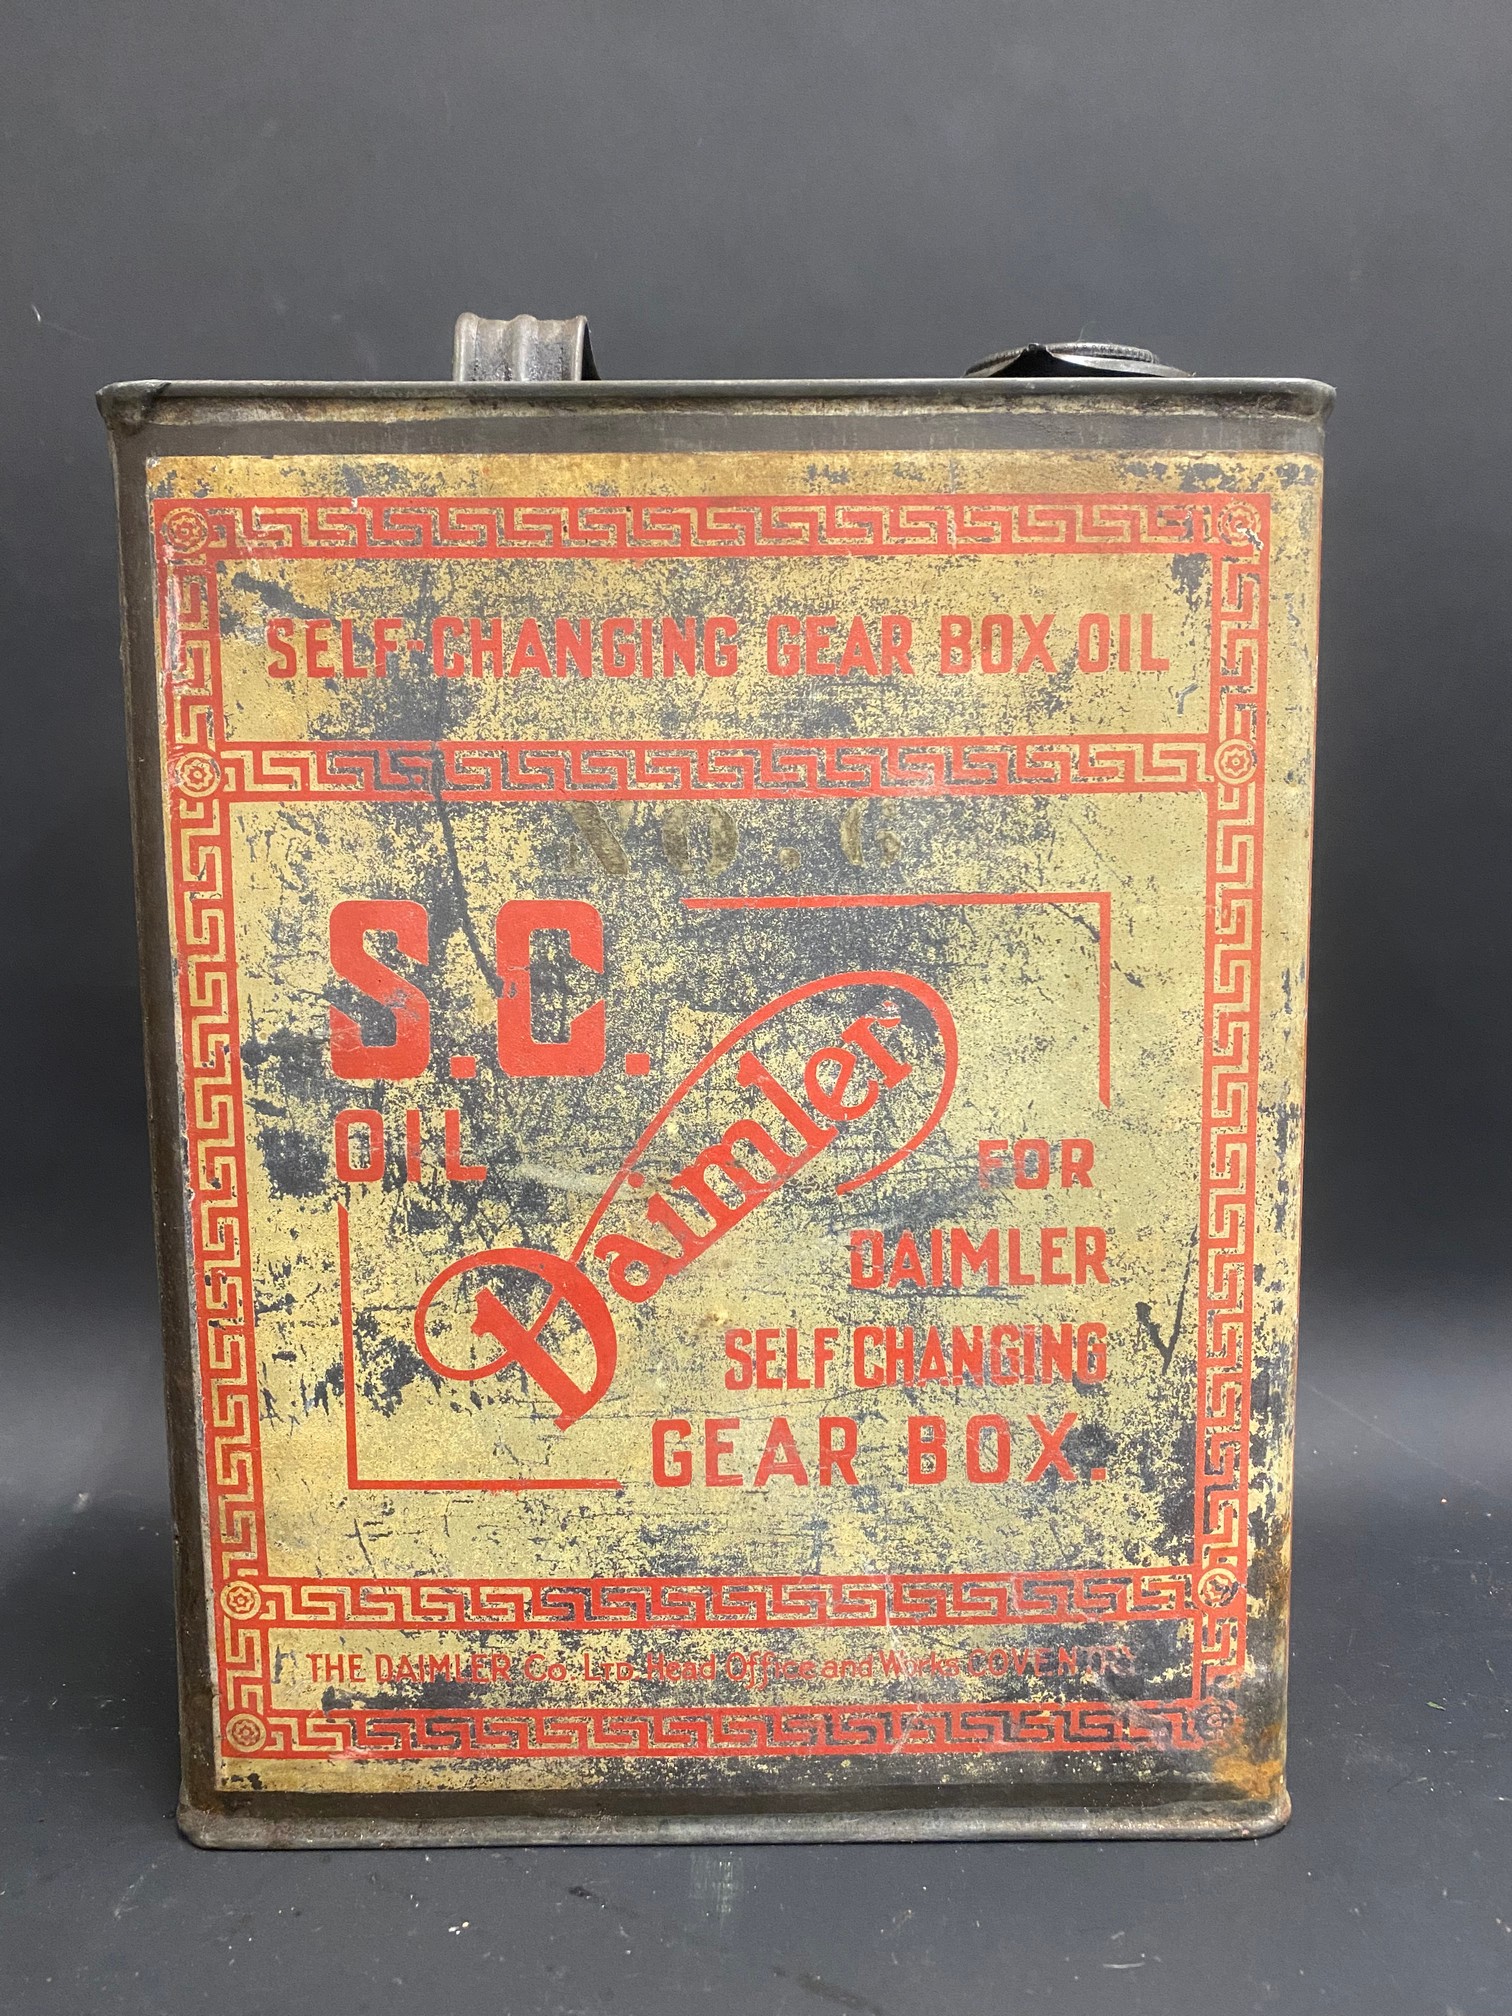 A Daimler Self Changing Gear Box Oil gallon can. - Image 3 of 6